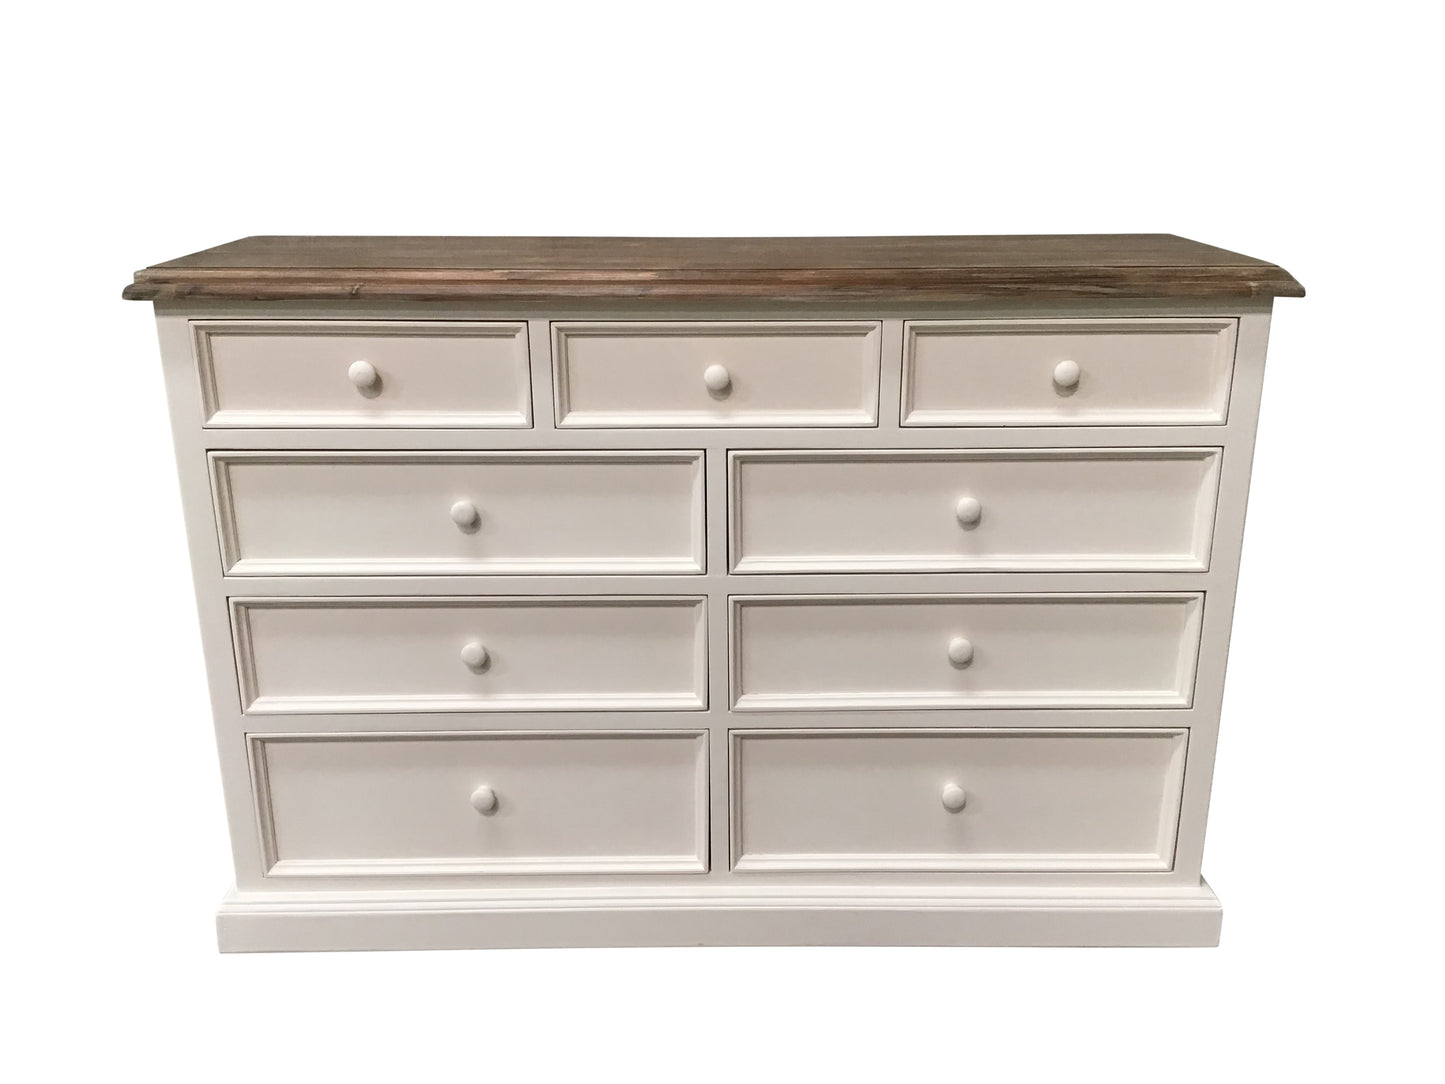 Biarritz Large Chest of Drawers painted off-white